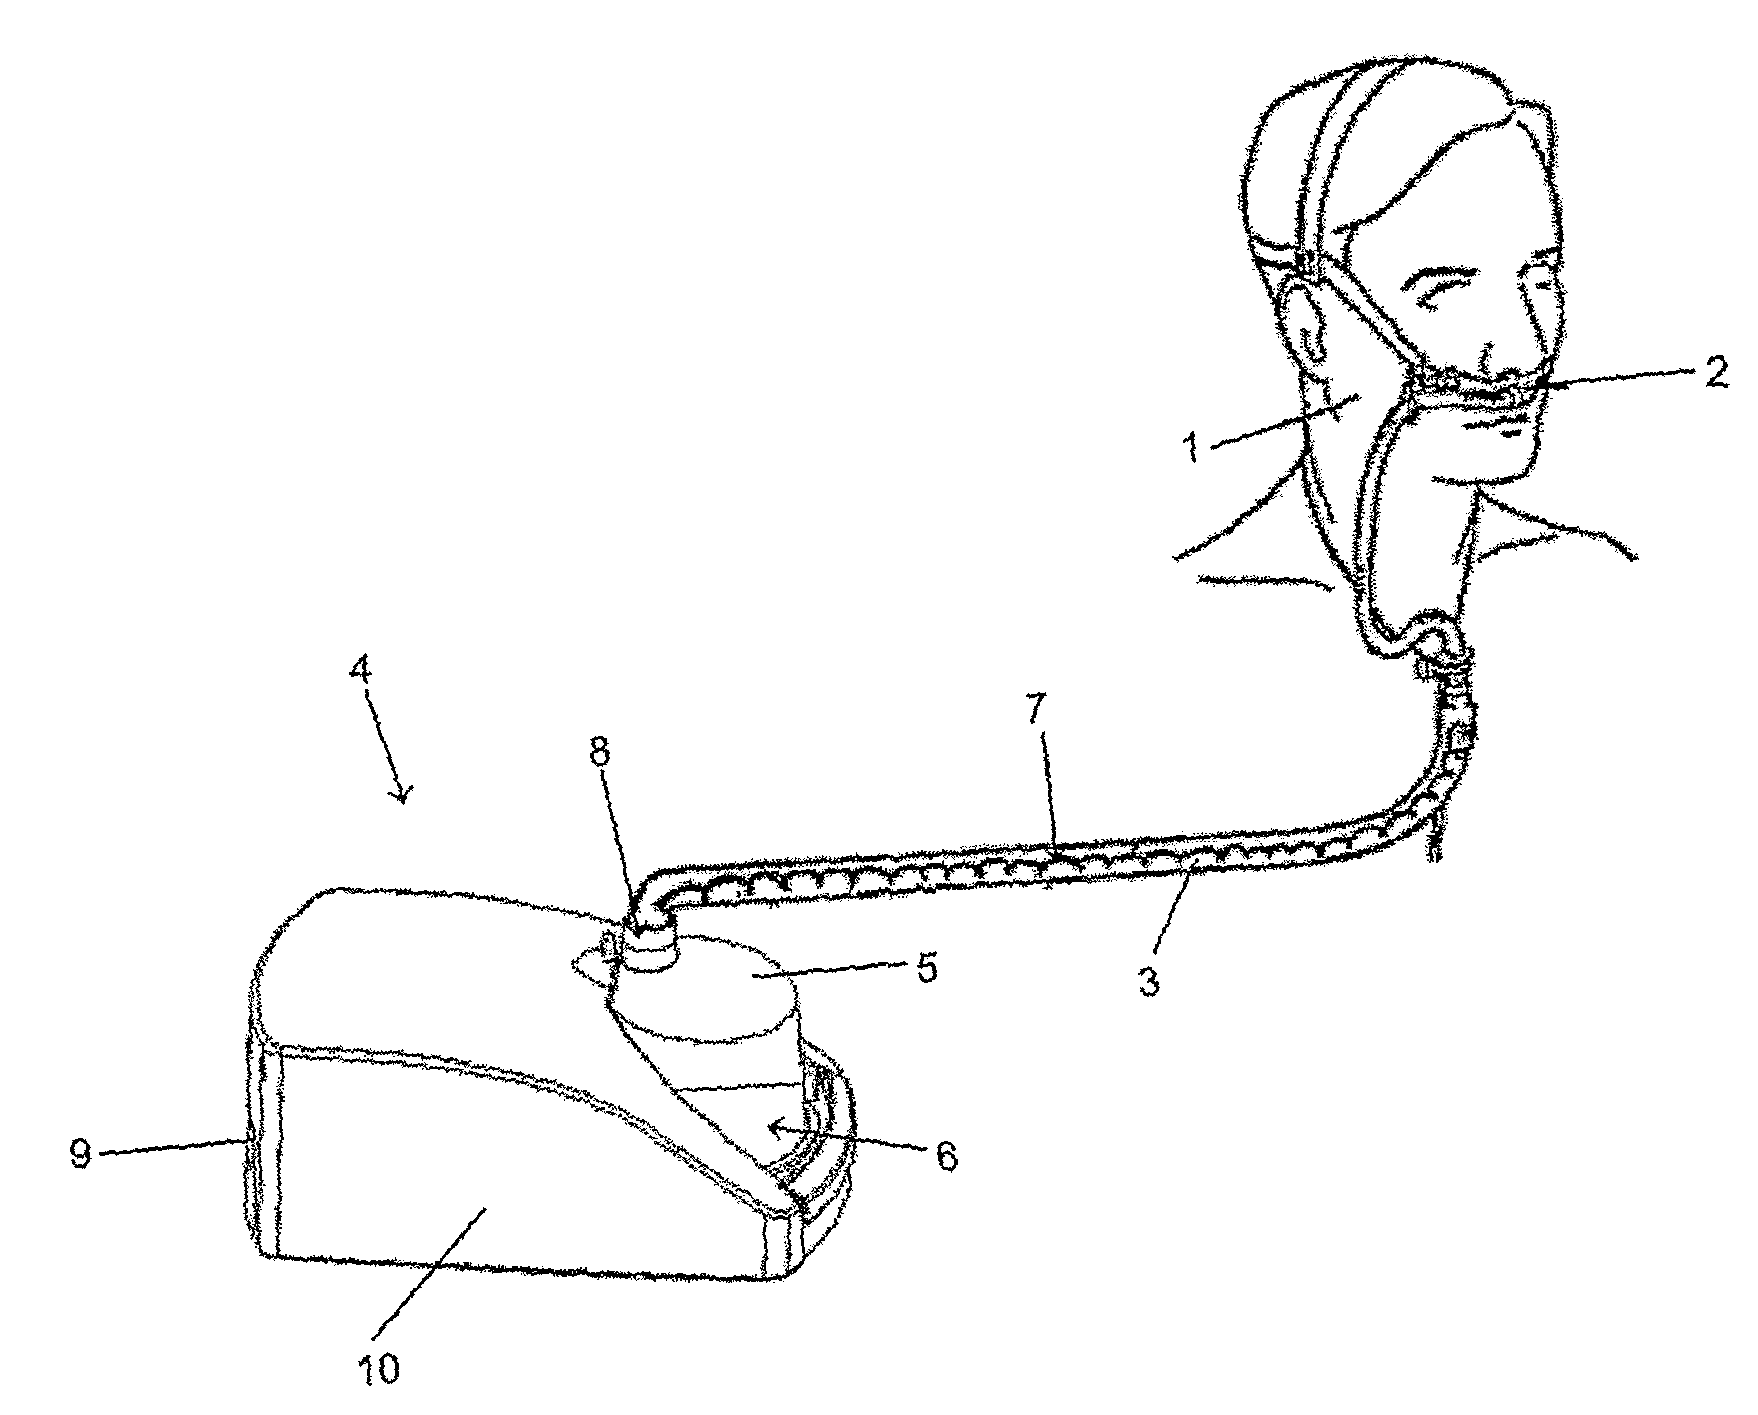 Breathing Assistance Apparatus With a Manifold to Add Auxiliary Gases to Ambient Gases